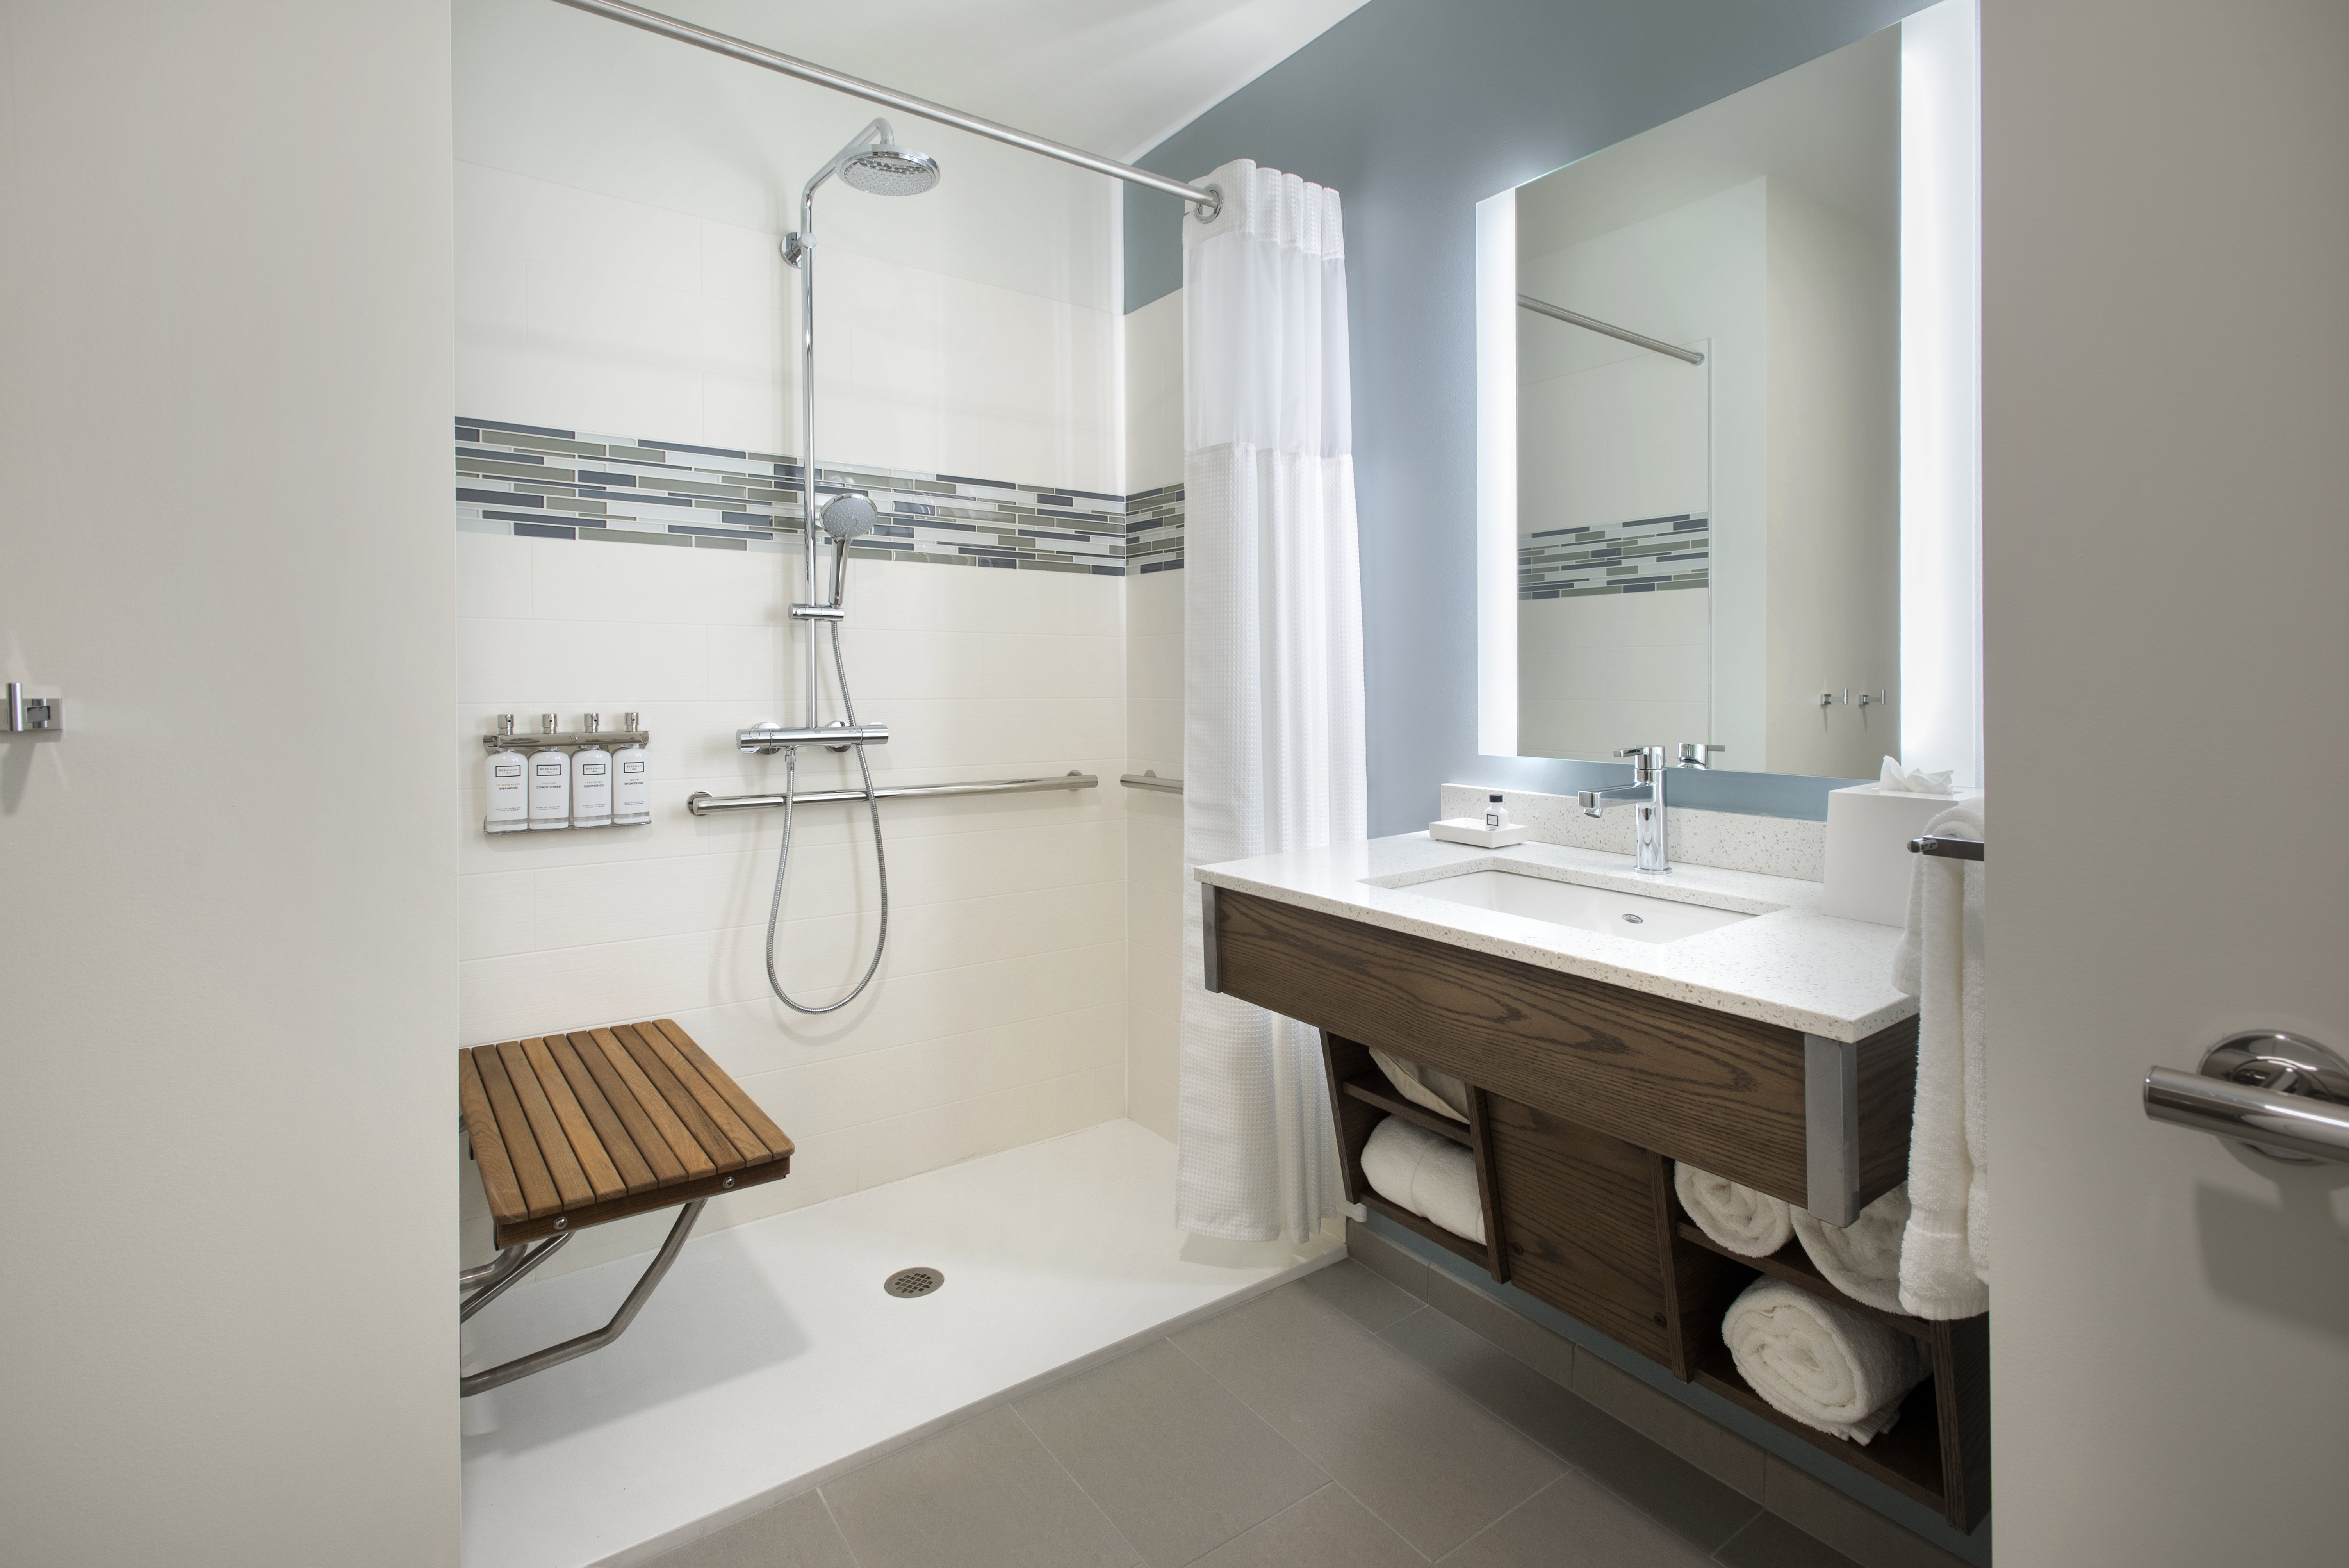 Our mobility accessible features include a roll-in shower.